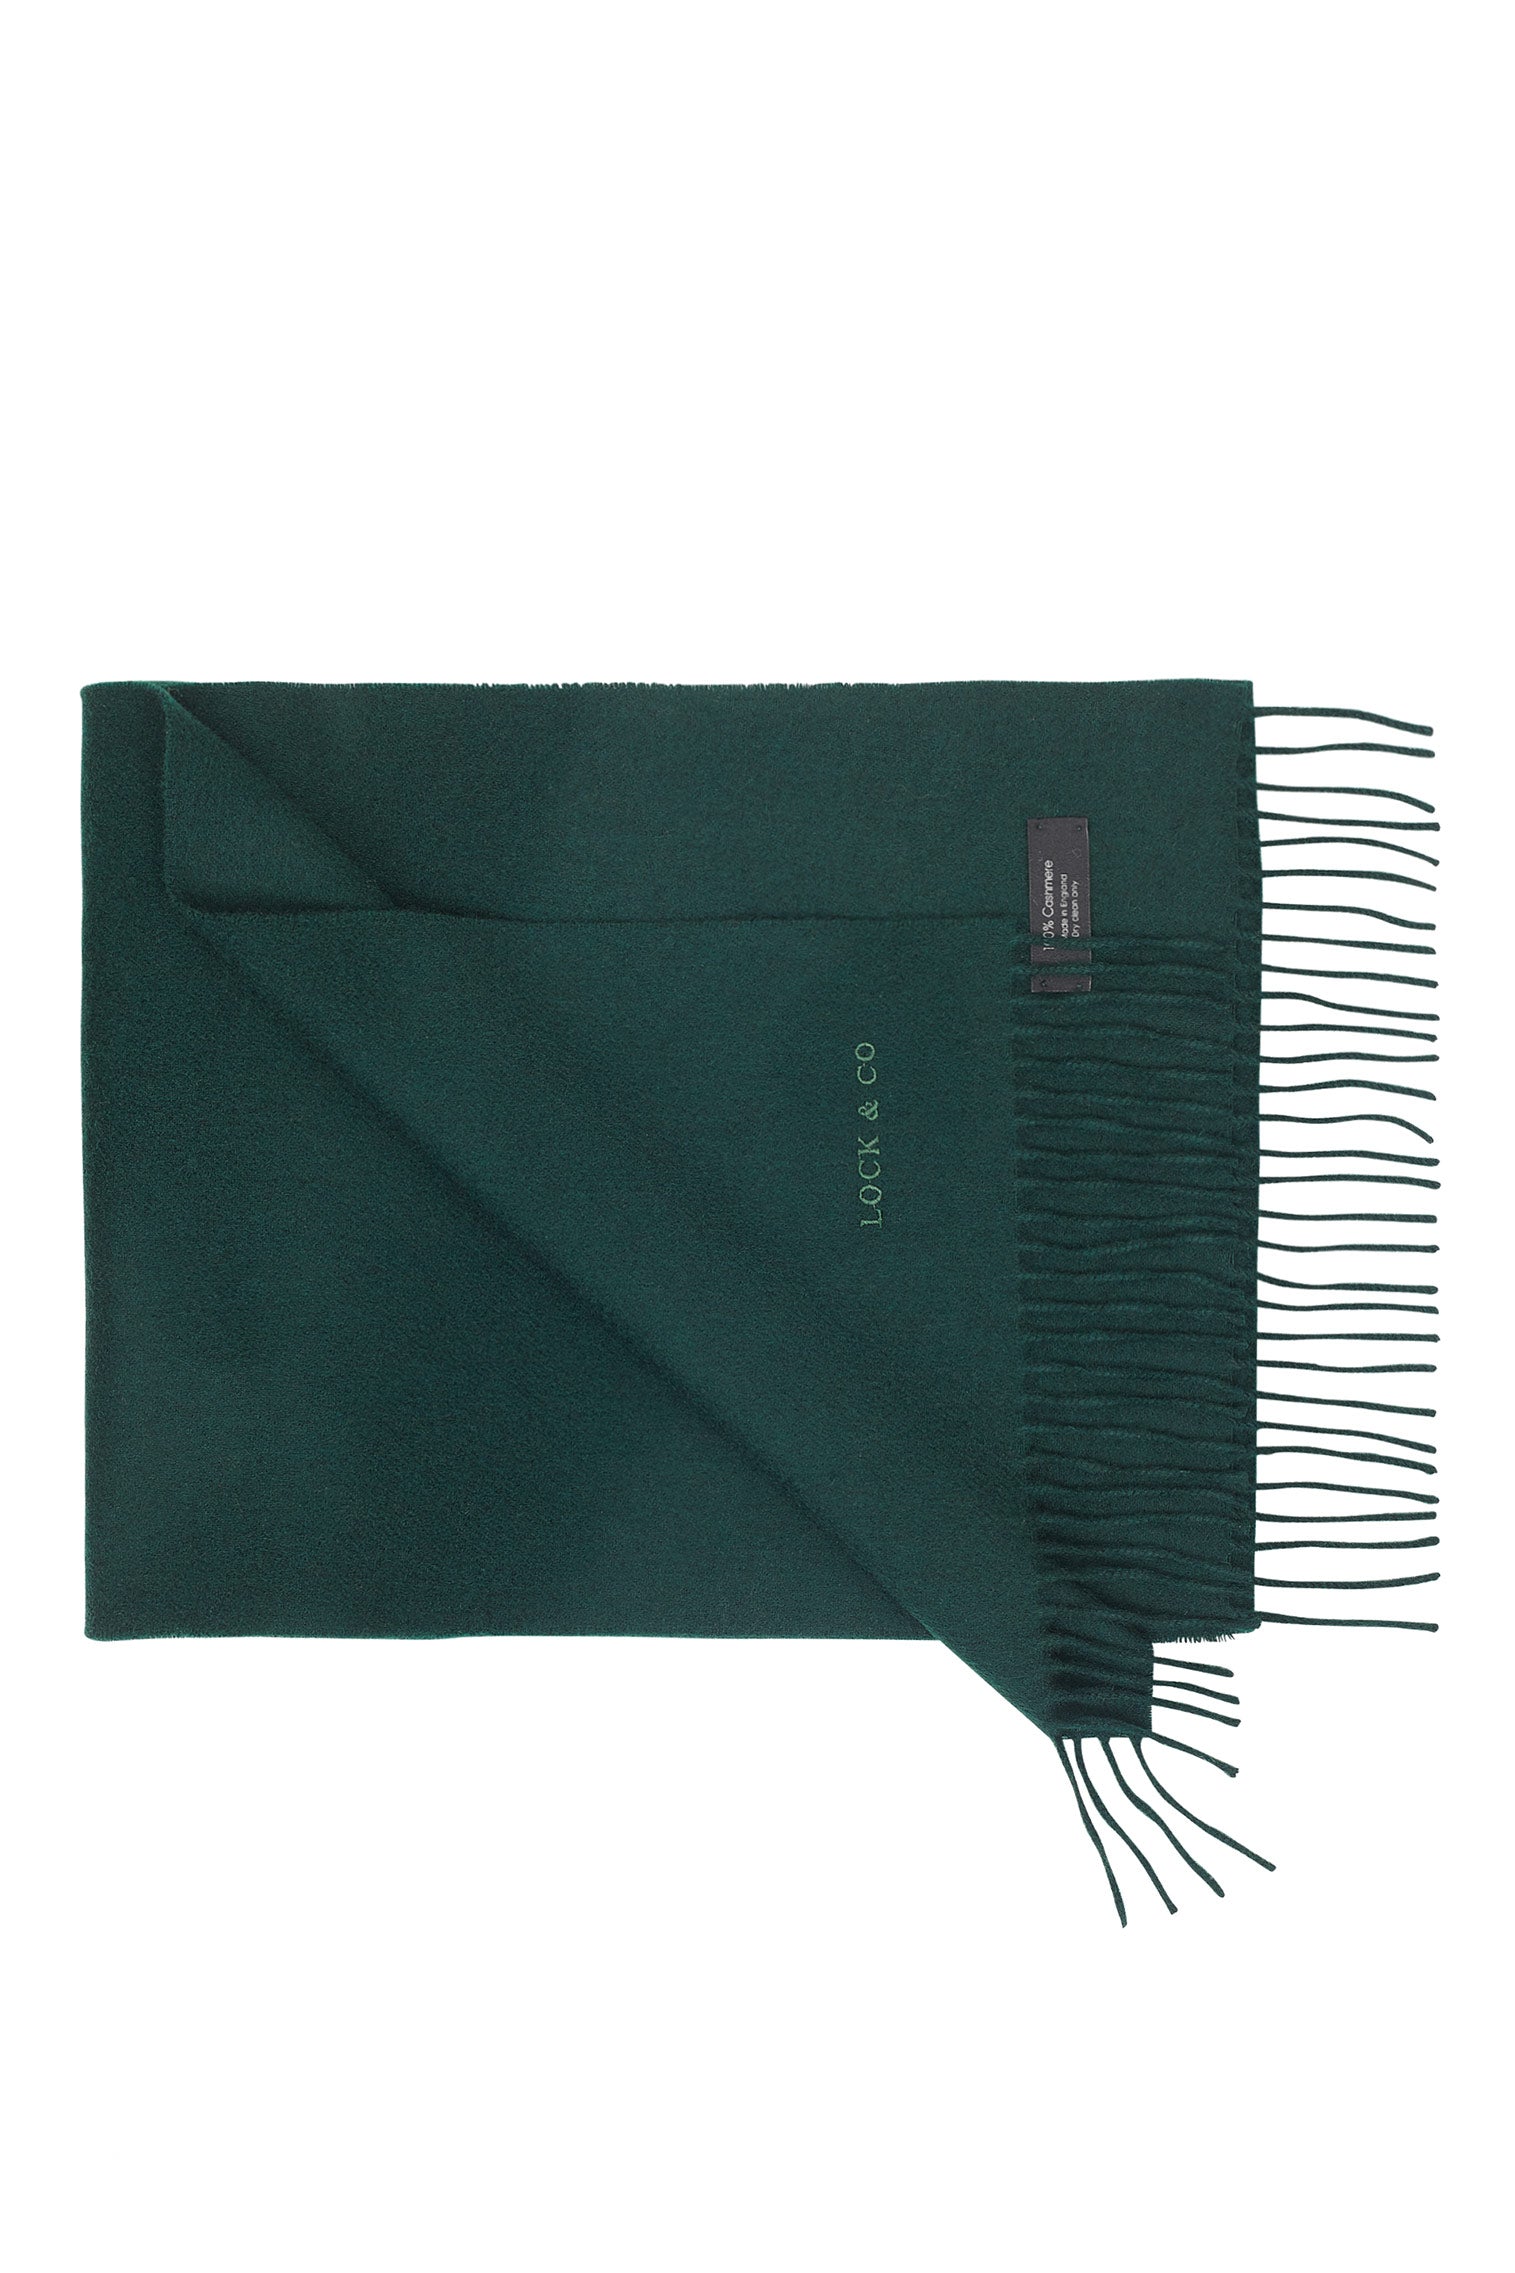 Cashmere Scarf - Products - Lock & Co. Hatters London UK